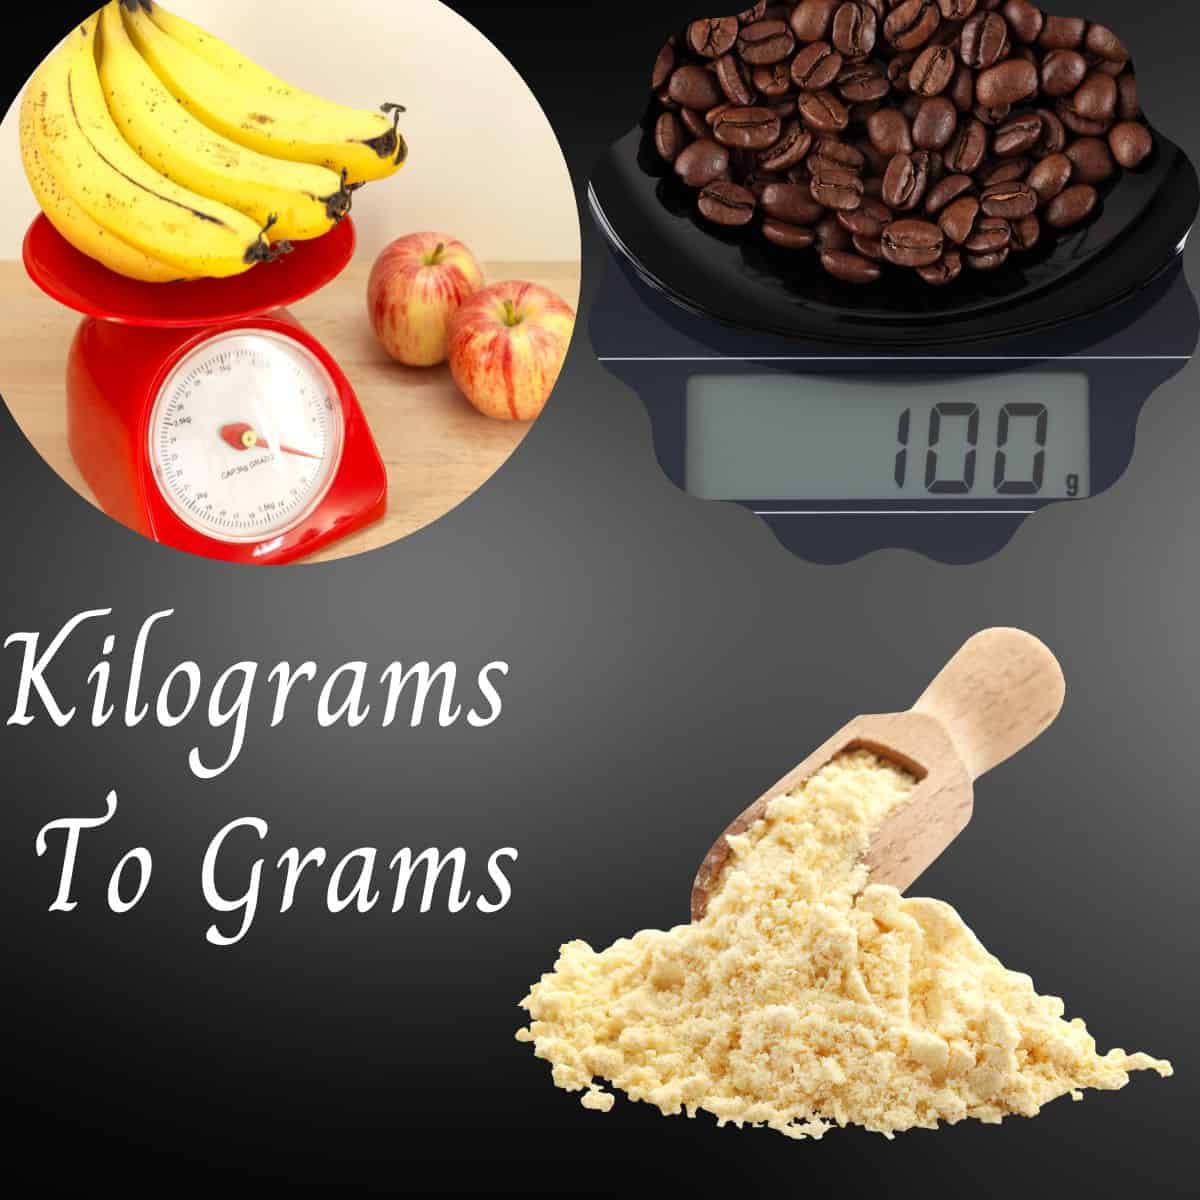 image with a food scale weighing bananas and another scale weighing coffee beans to show how many grams in a kilogram